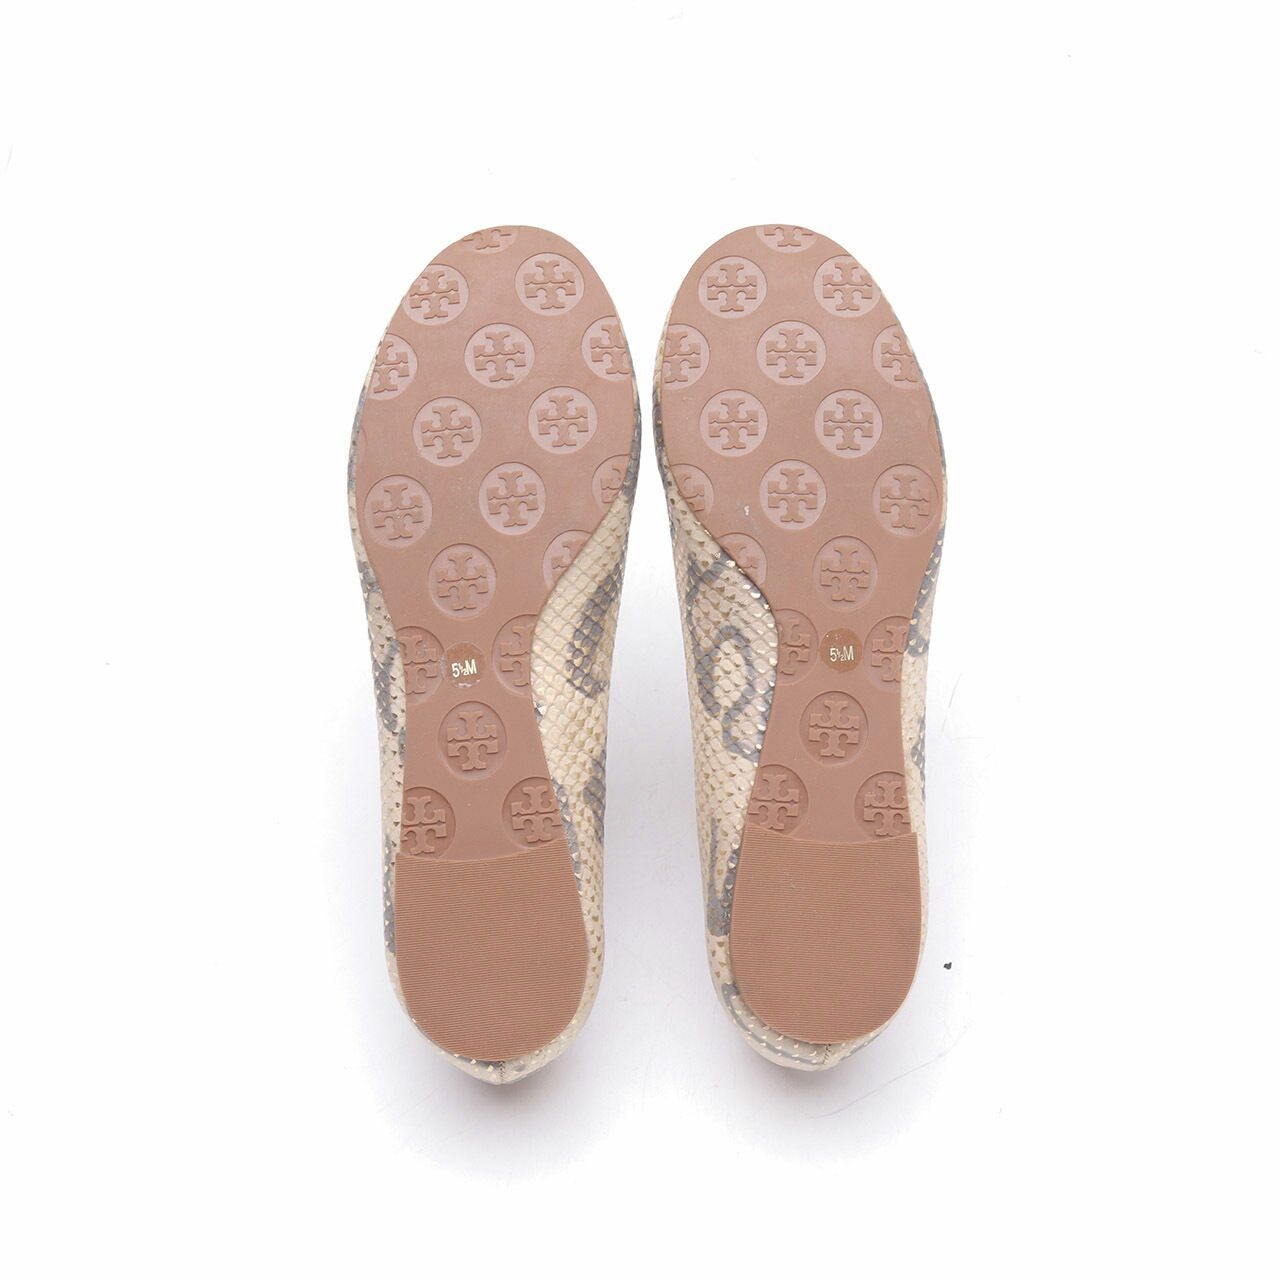 Tory Burch Multi Embossed Leather Flats